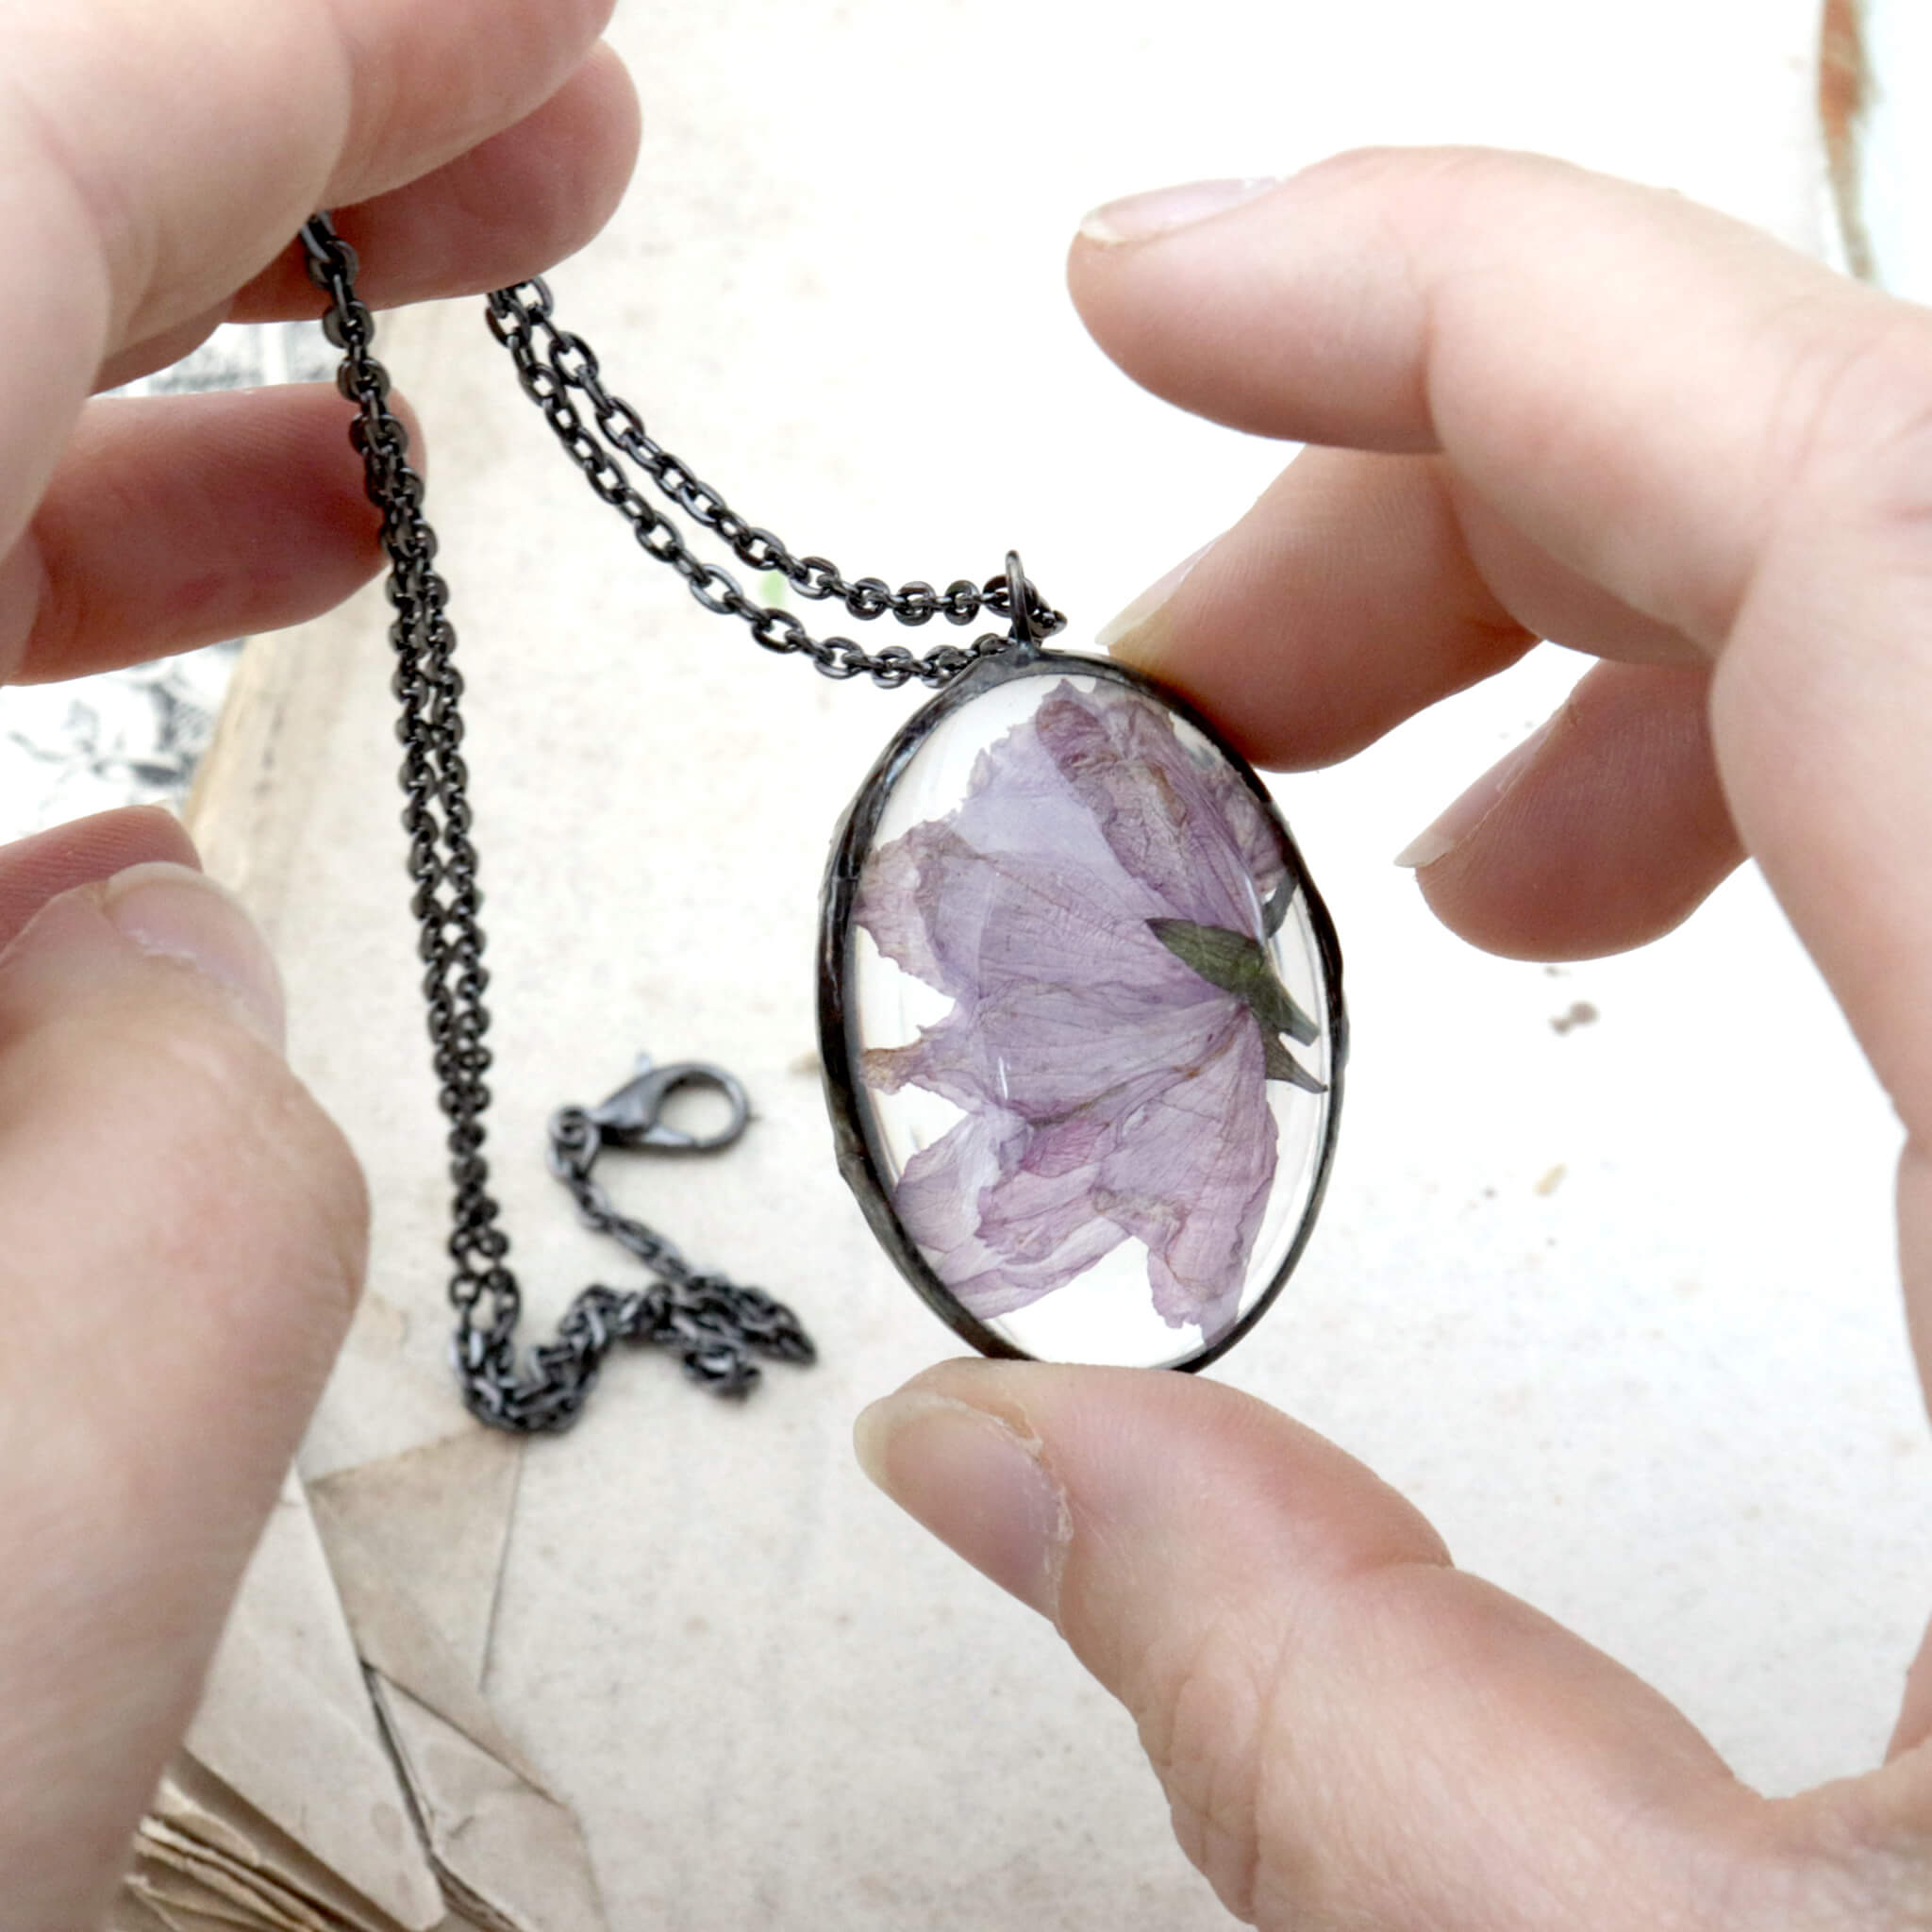 Oval cherry blossom necklace being hold in hands